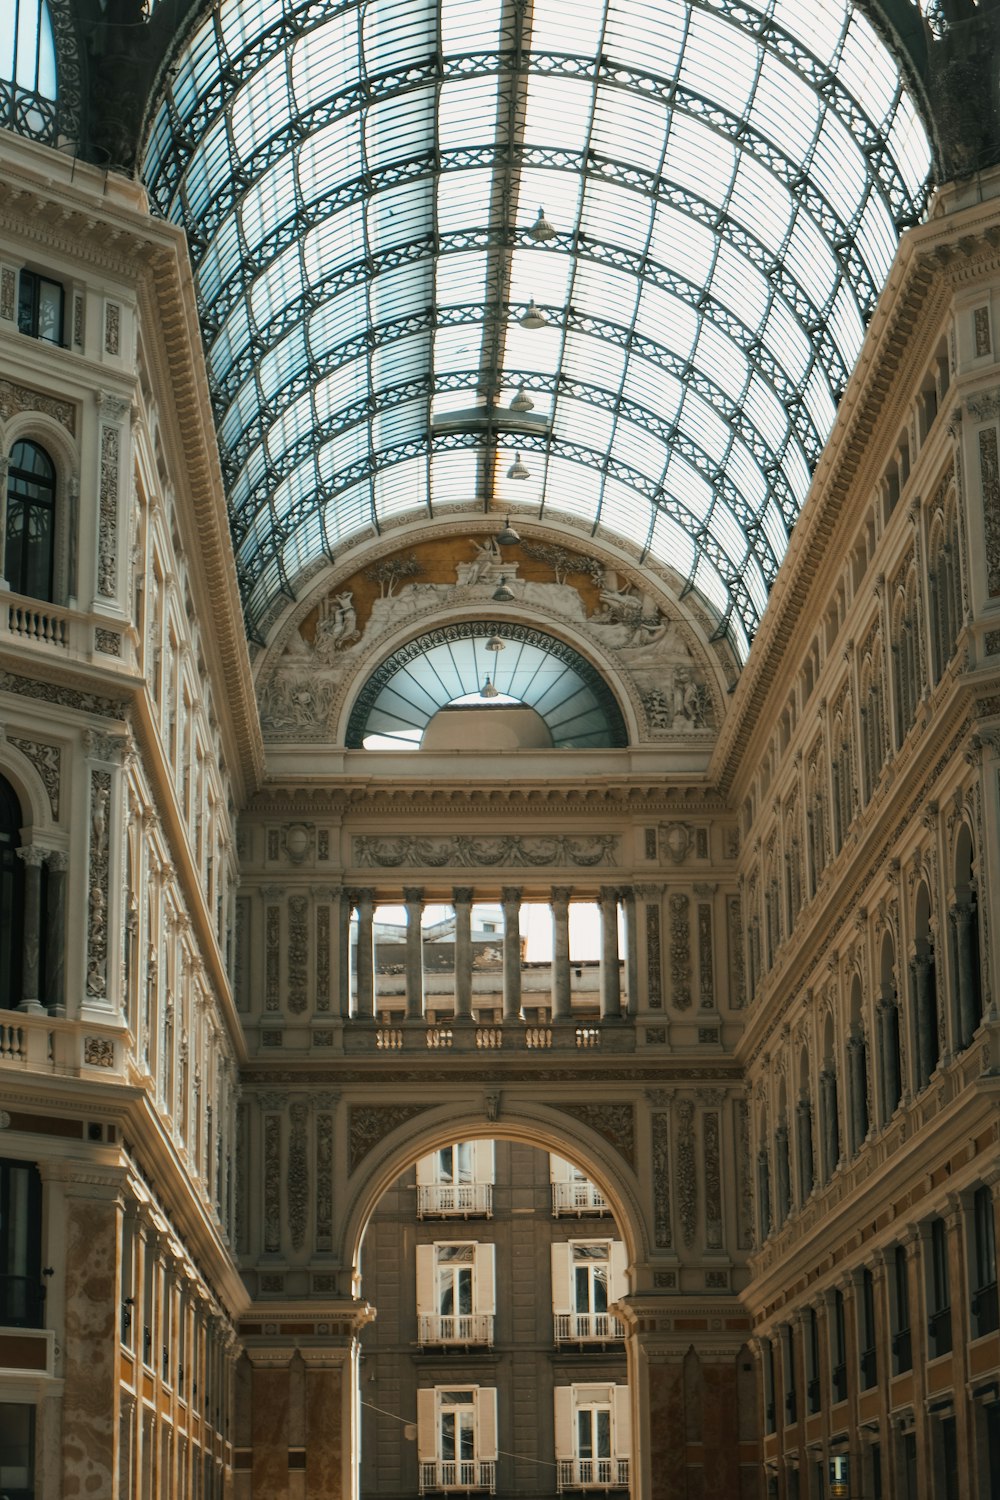 Galleria Umberto I with a glass dome